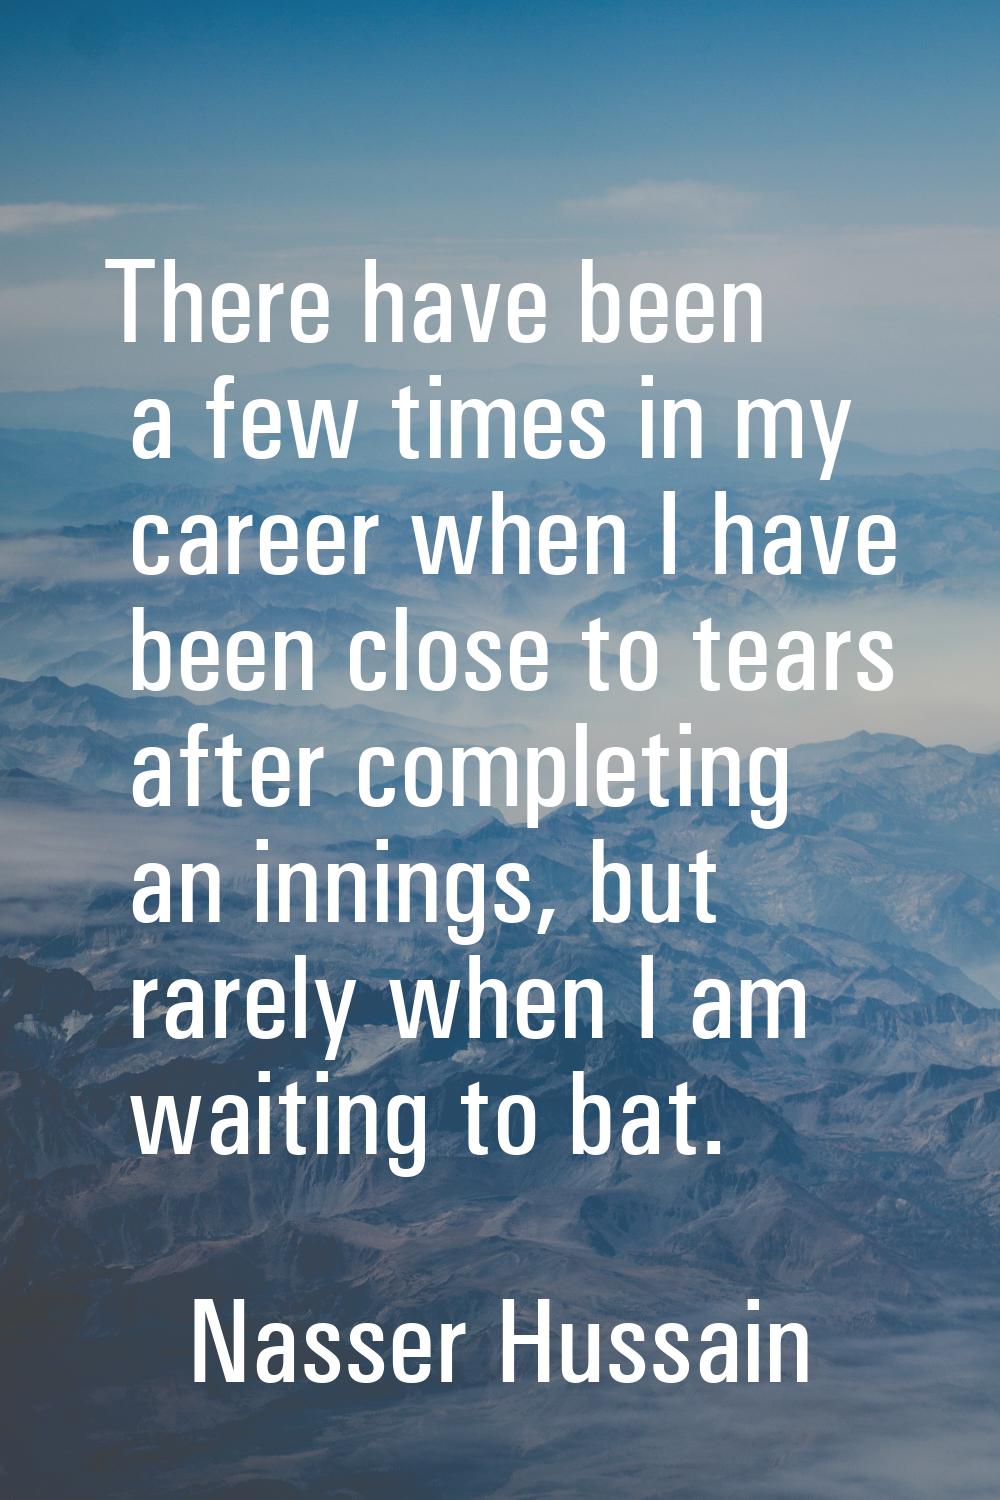 There have been a few times in my career when I have been close to tears after completing an inning